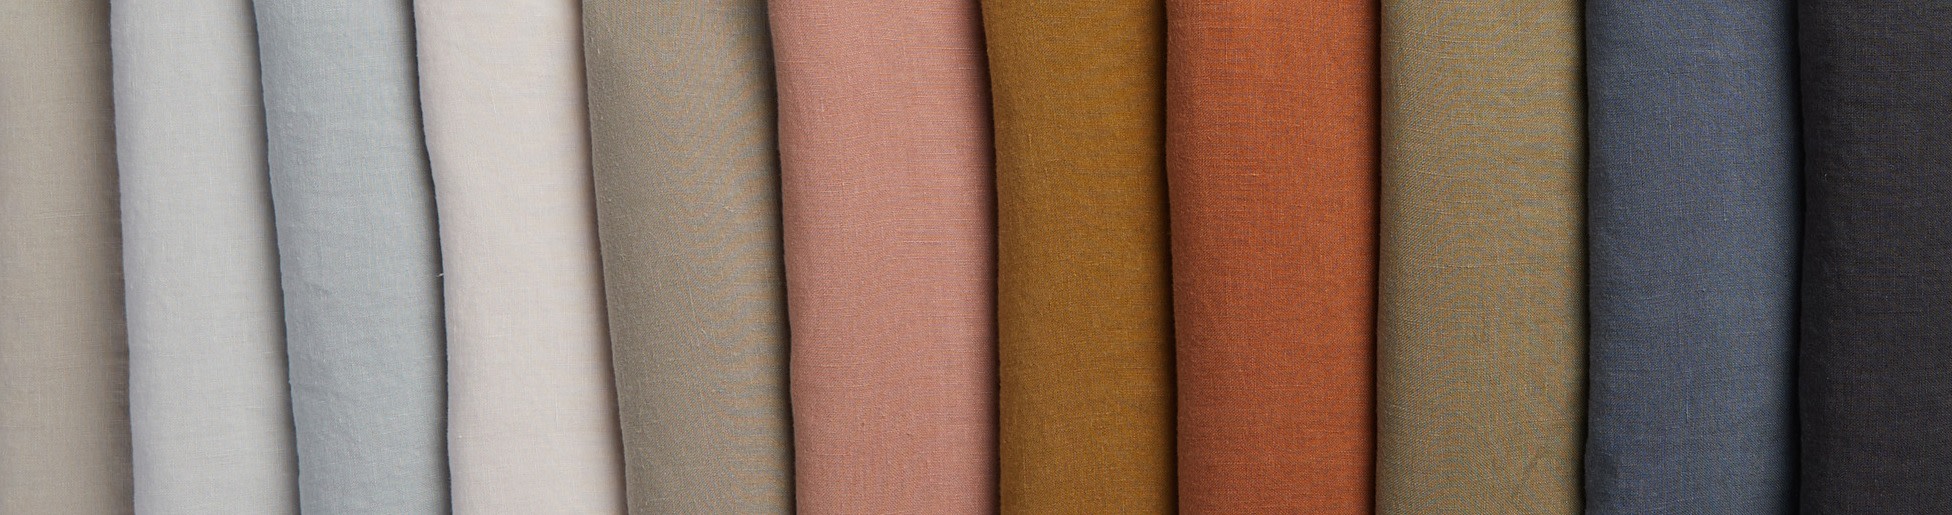 a rainbow of linen colored fabric swatches